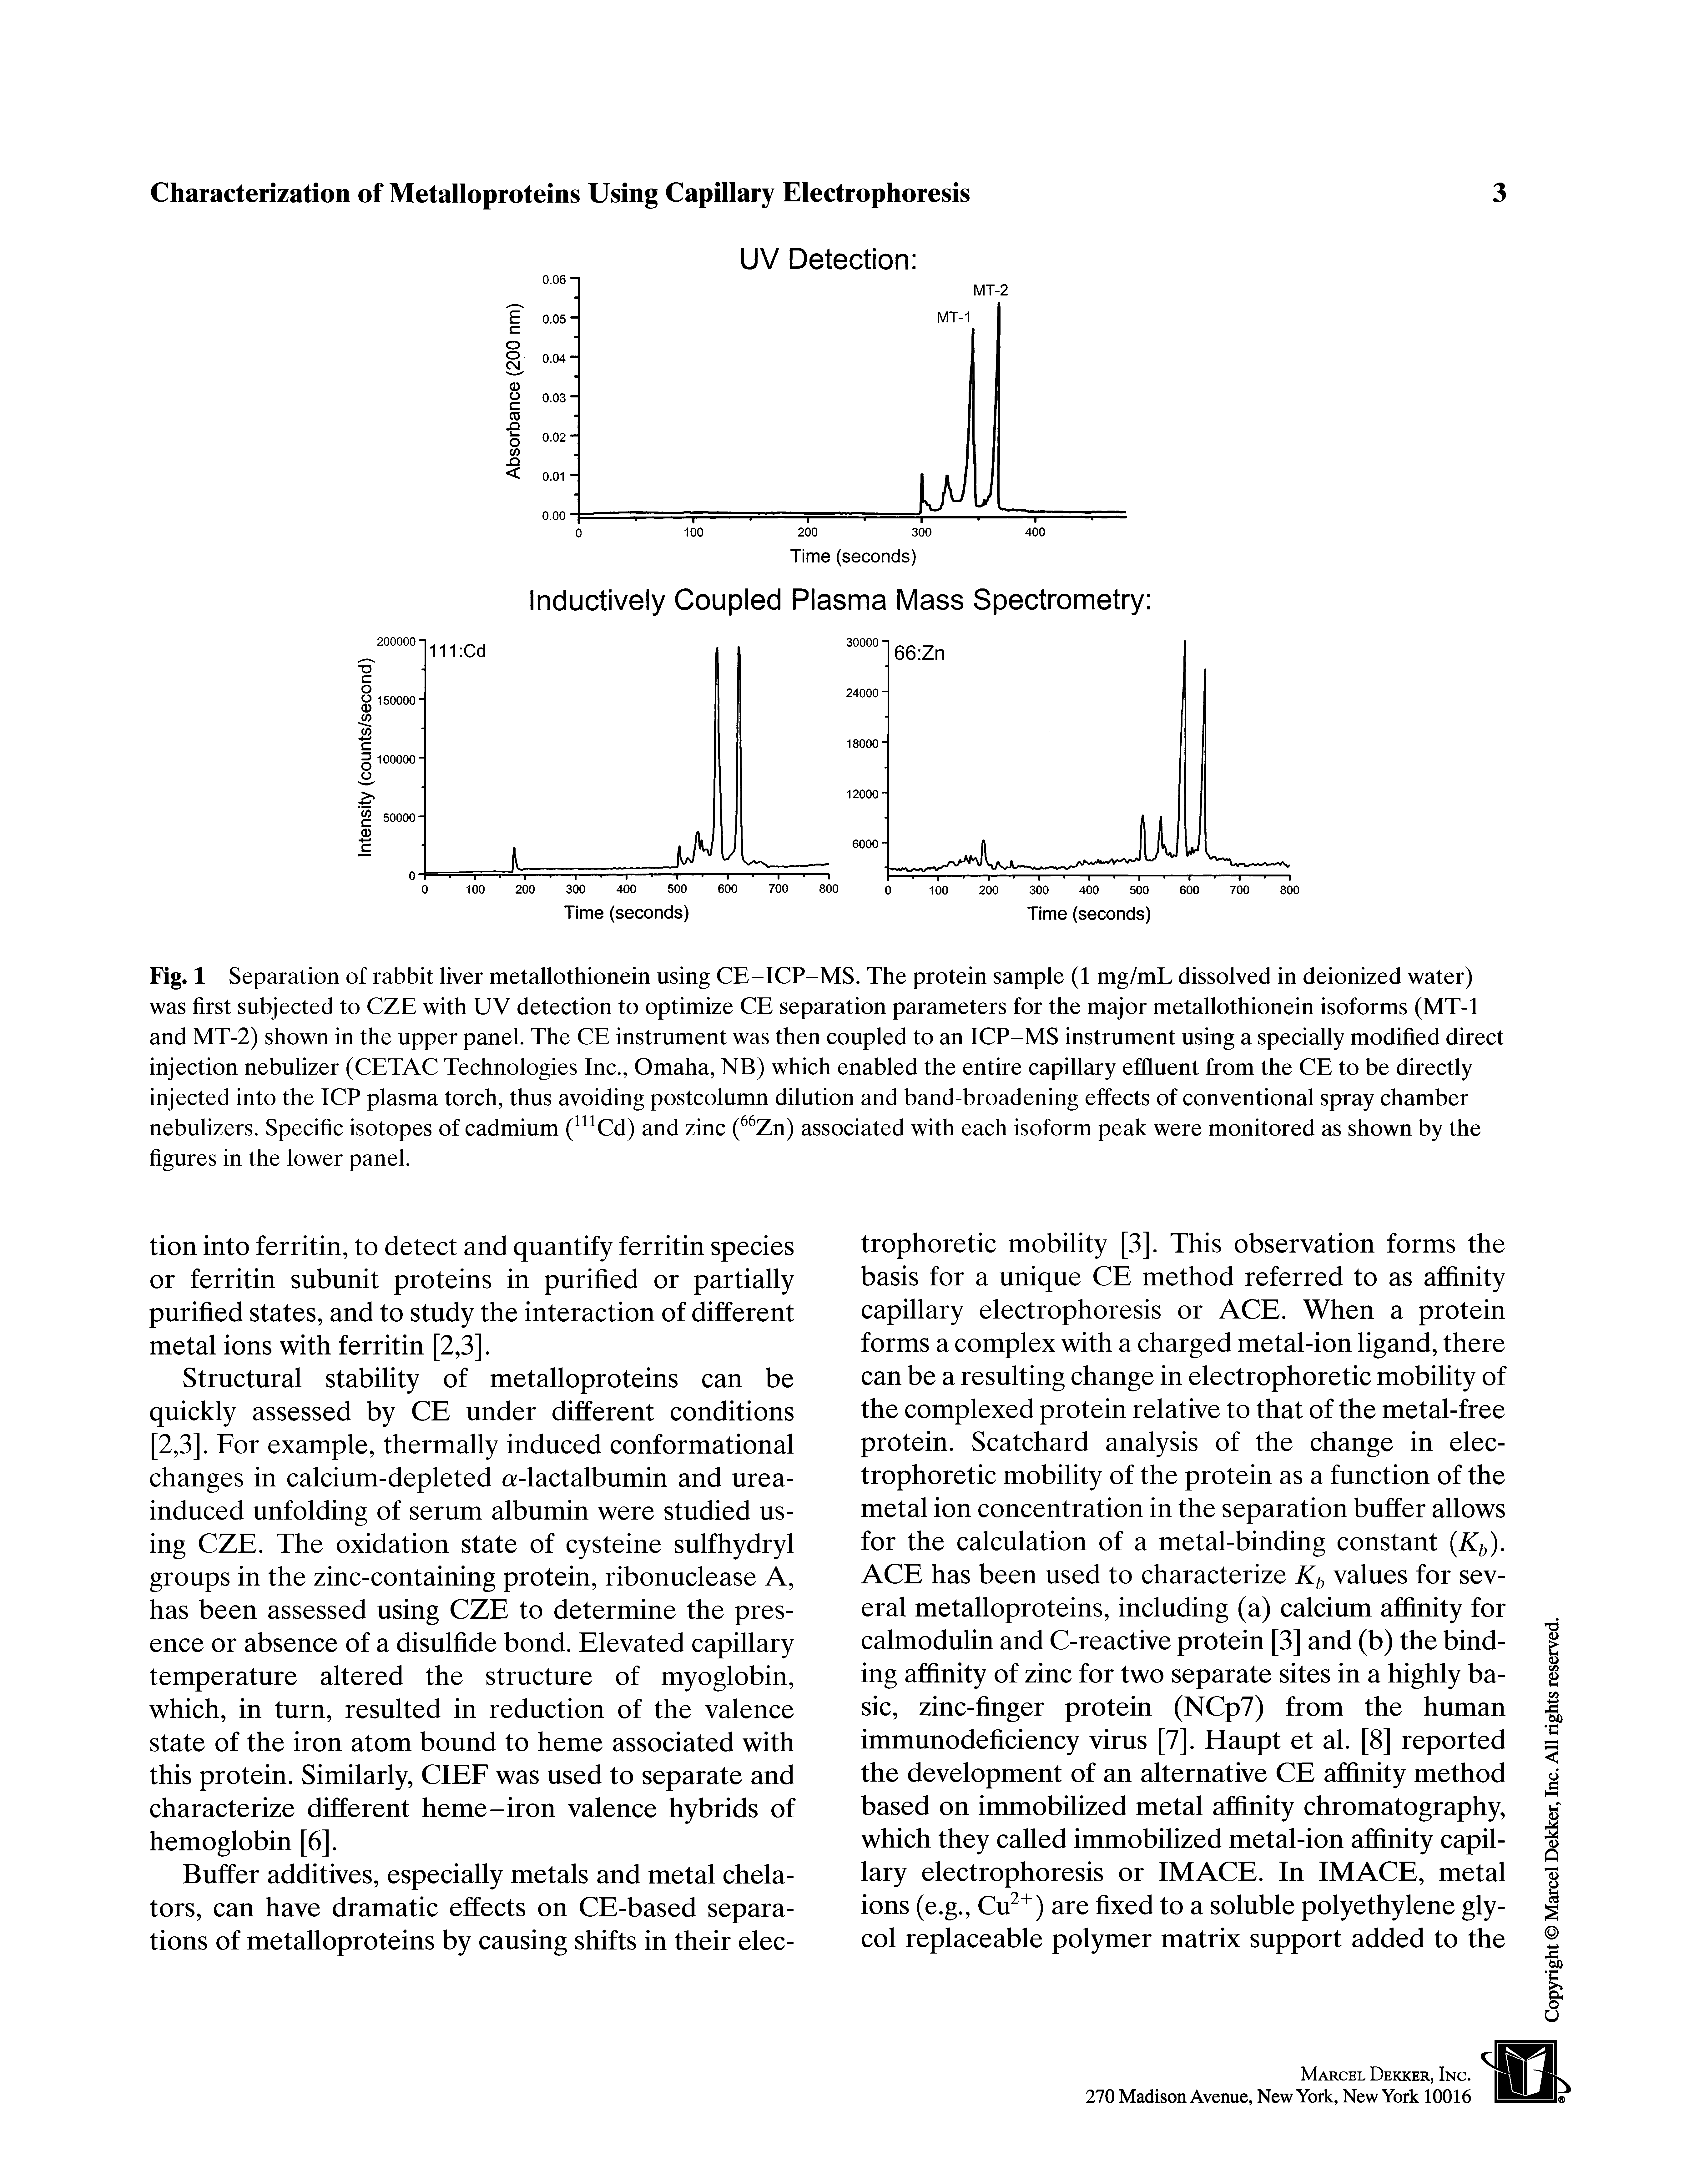 Fig. 1 Separation of rabbit liver metallothionein using CE-ICP-MS. The protein sample (1 mg/mL dissolved in deionized water) was first subjeeted to CZE with UV detection to optimize CE separation parameters for the major metallothionein isoforms (MT-1 and MT-2) shown in the upper panel. The CE instrument was then coupled to an ICP-MS instrument using a specially modified direct injection nebulizer (CETAC Technologies Inc., Omaha, NB) which enabled the entire capillary effluent from the CE to be directly injected into the ICP plasma torch, thus avoiding postcolumn dilution and band-broadening effects of conventional spray chamber nebulizers. Specific isotopes of cadmium ( Cd) and zinc ( Zn) associated with each isoform peak were monitored as shown by the figures in the lower panel.